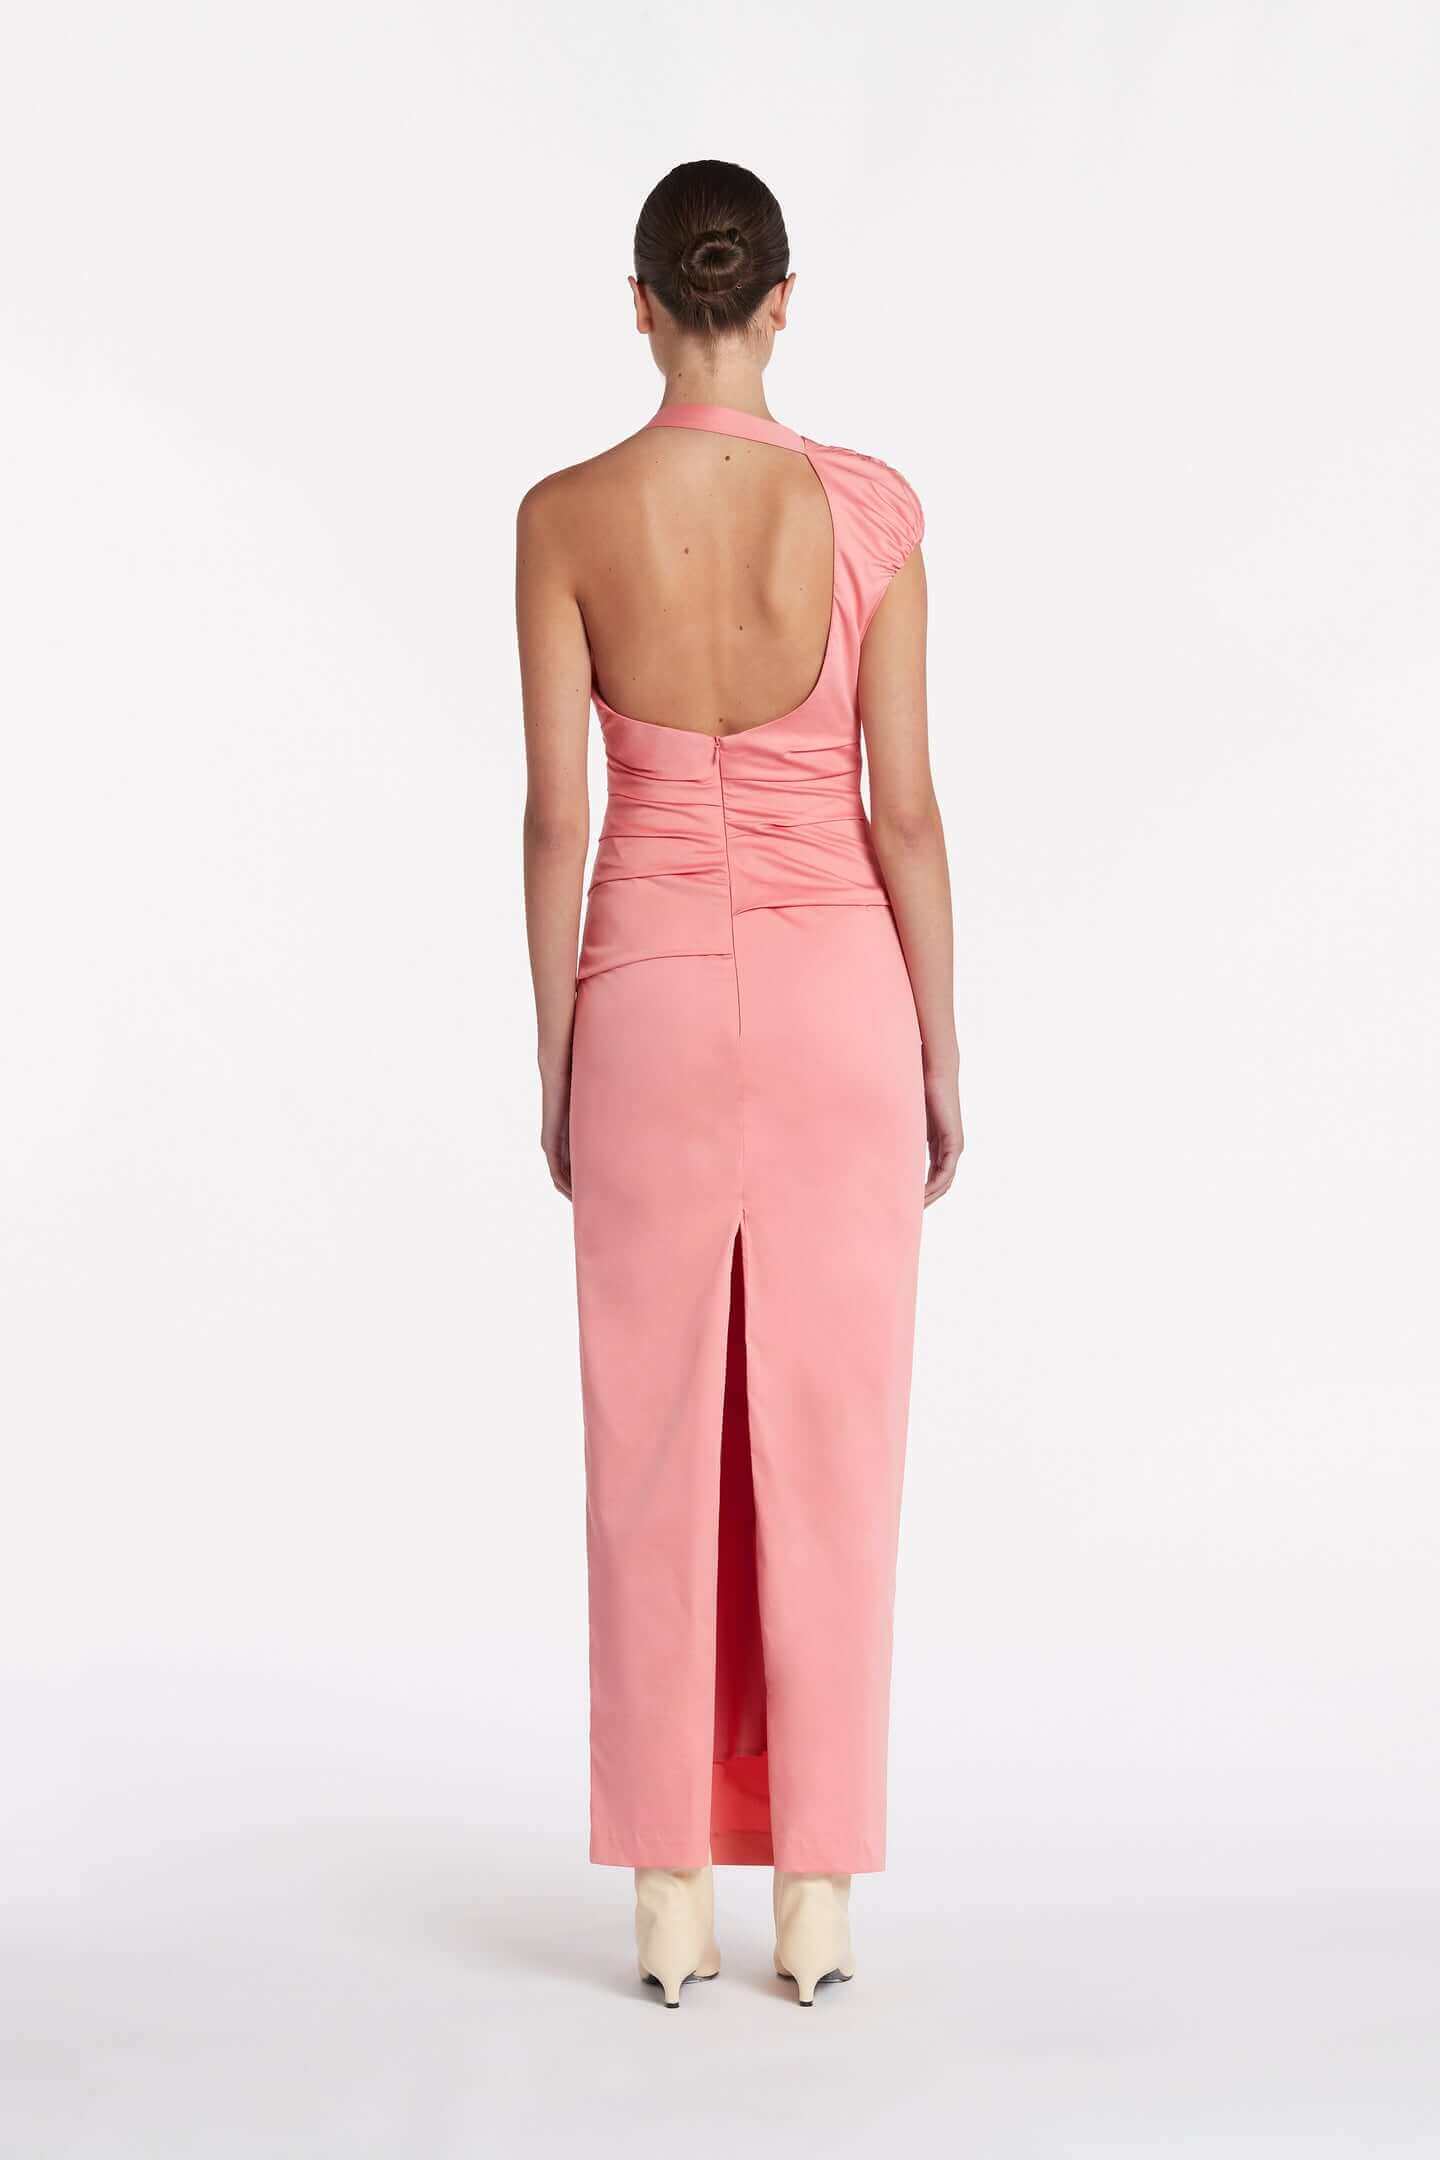 SIR Giacomo Gathered Gown in Pink available at TNT The New Trend Australia. Free shipping on orders over $300 AUD.